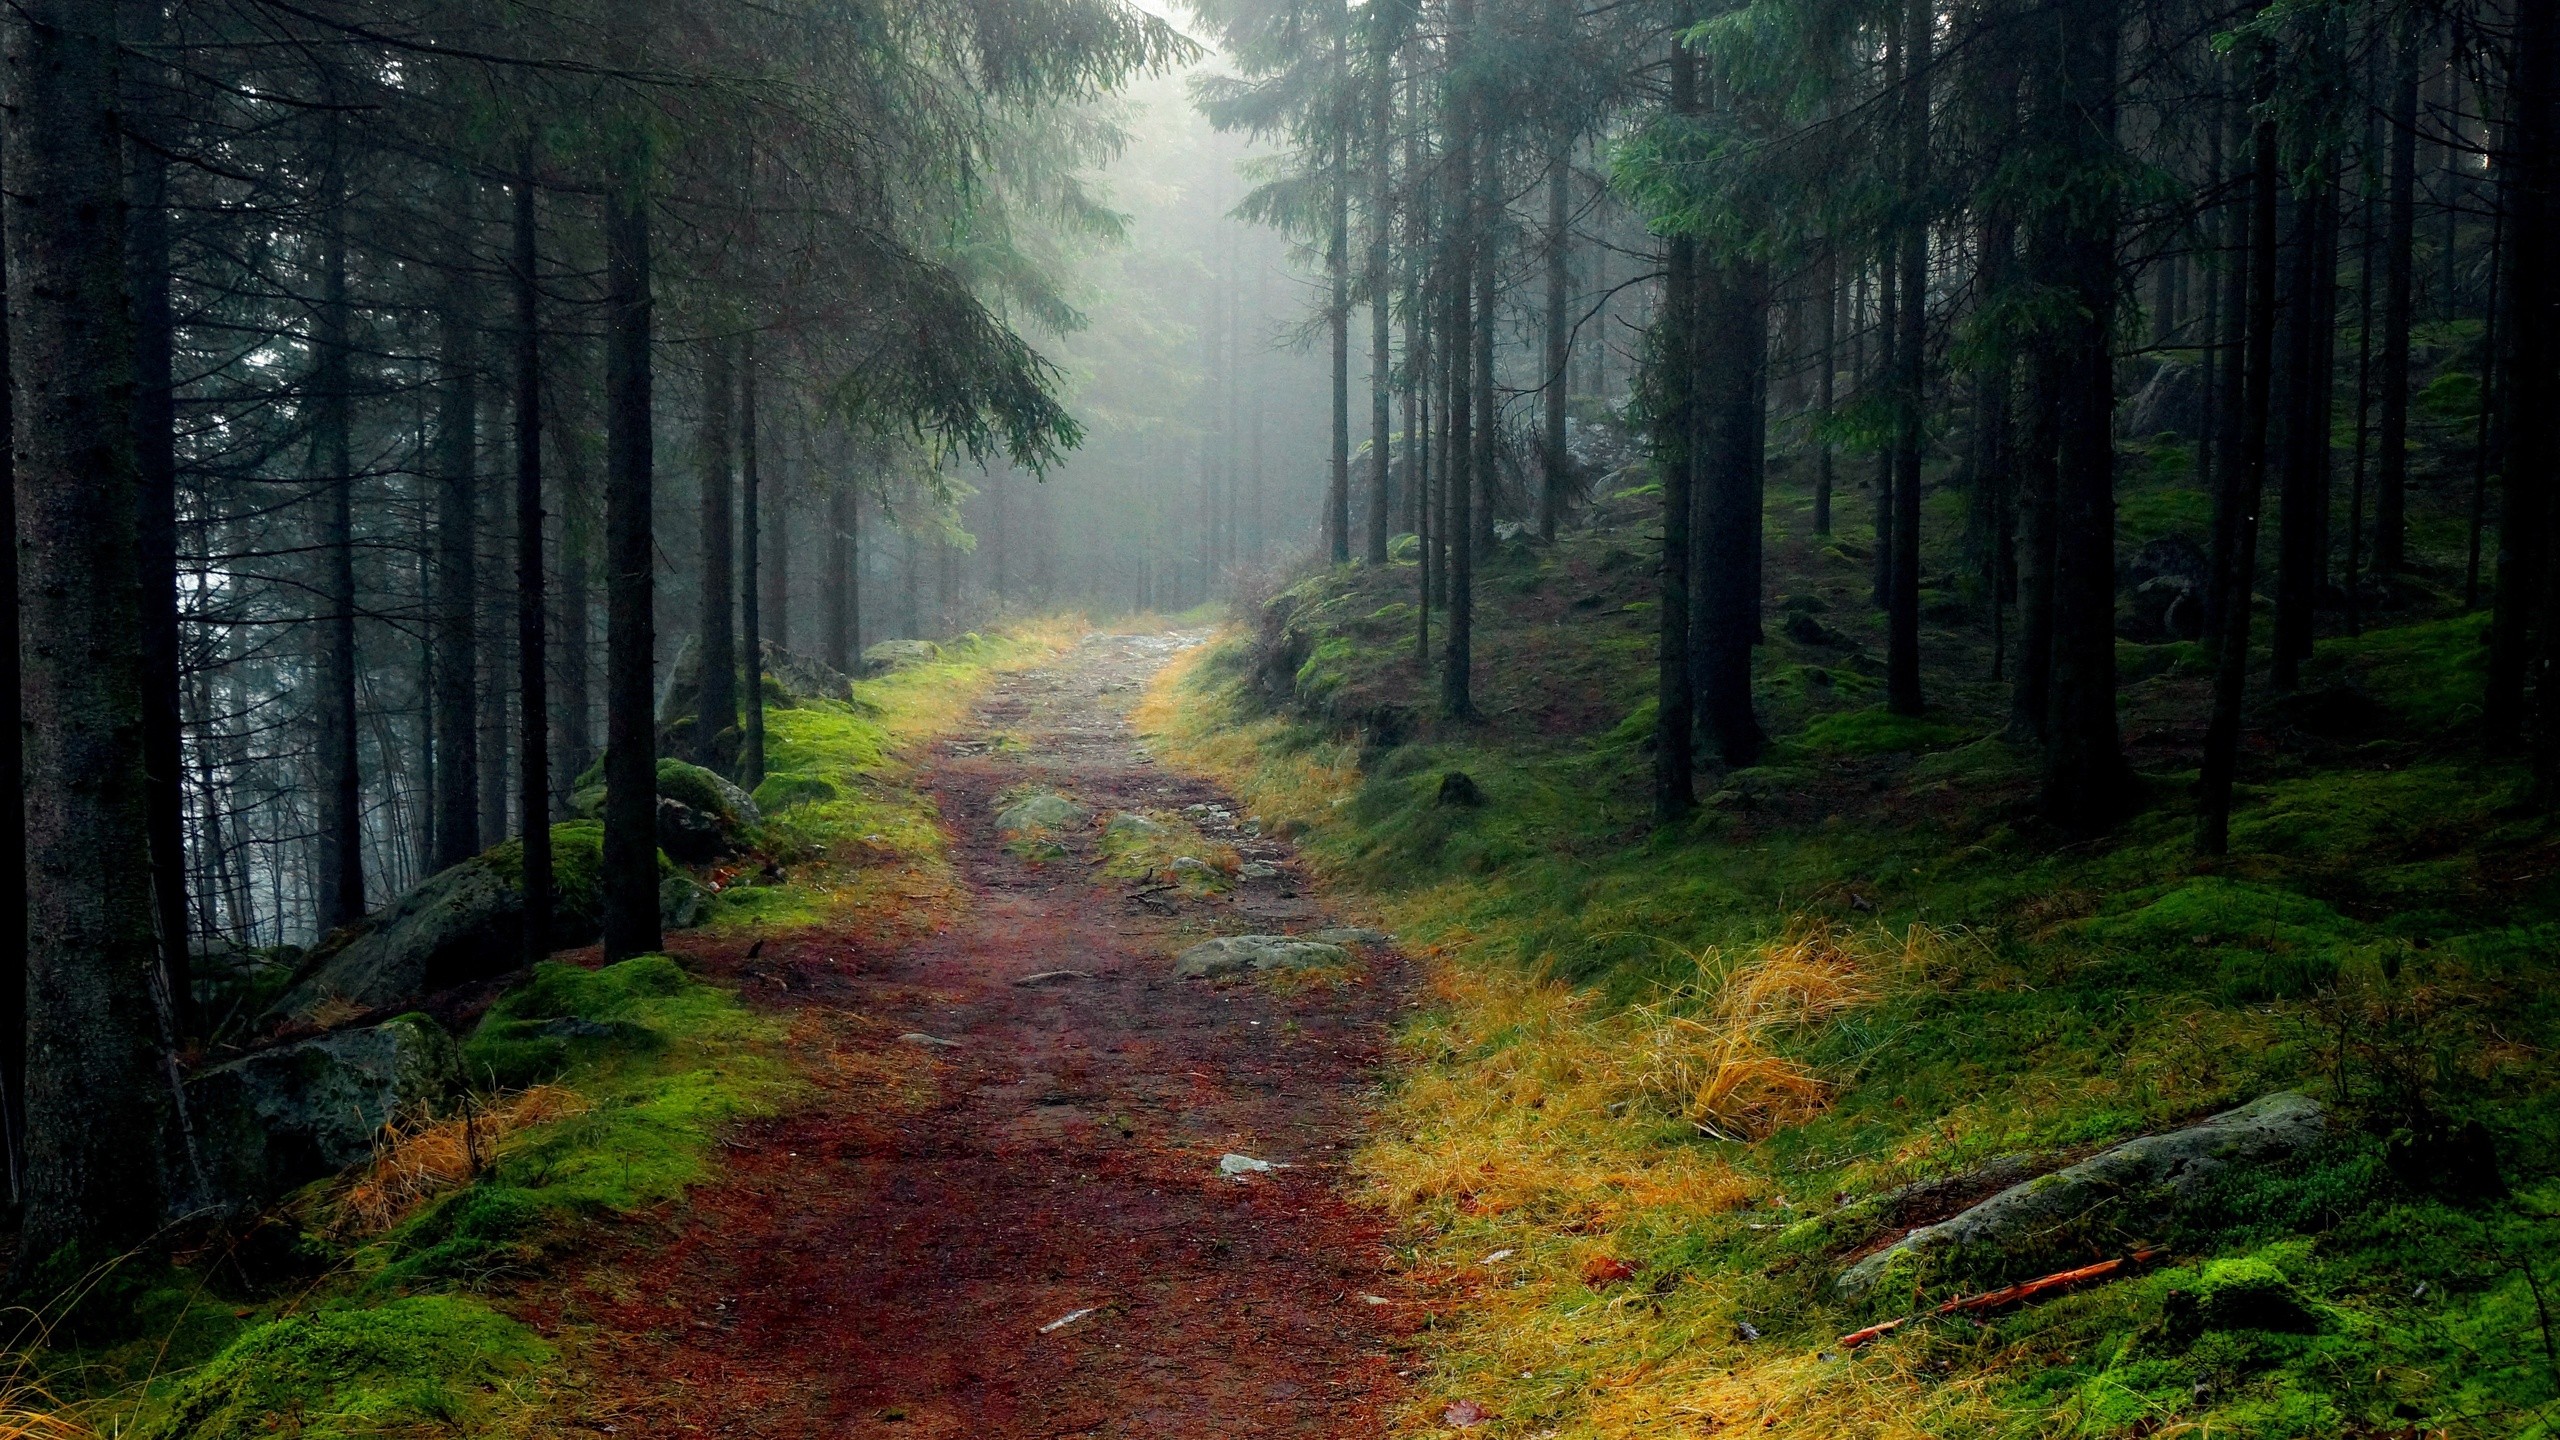 General 2560x1440 trees forest nature path outdoors